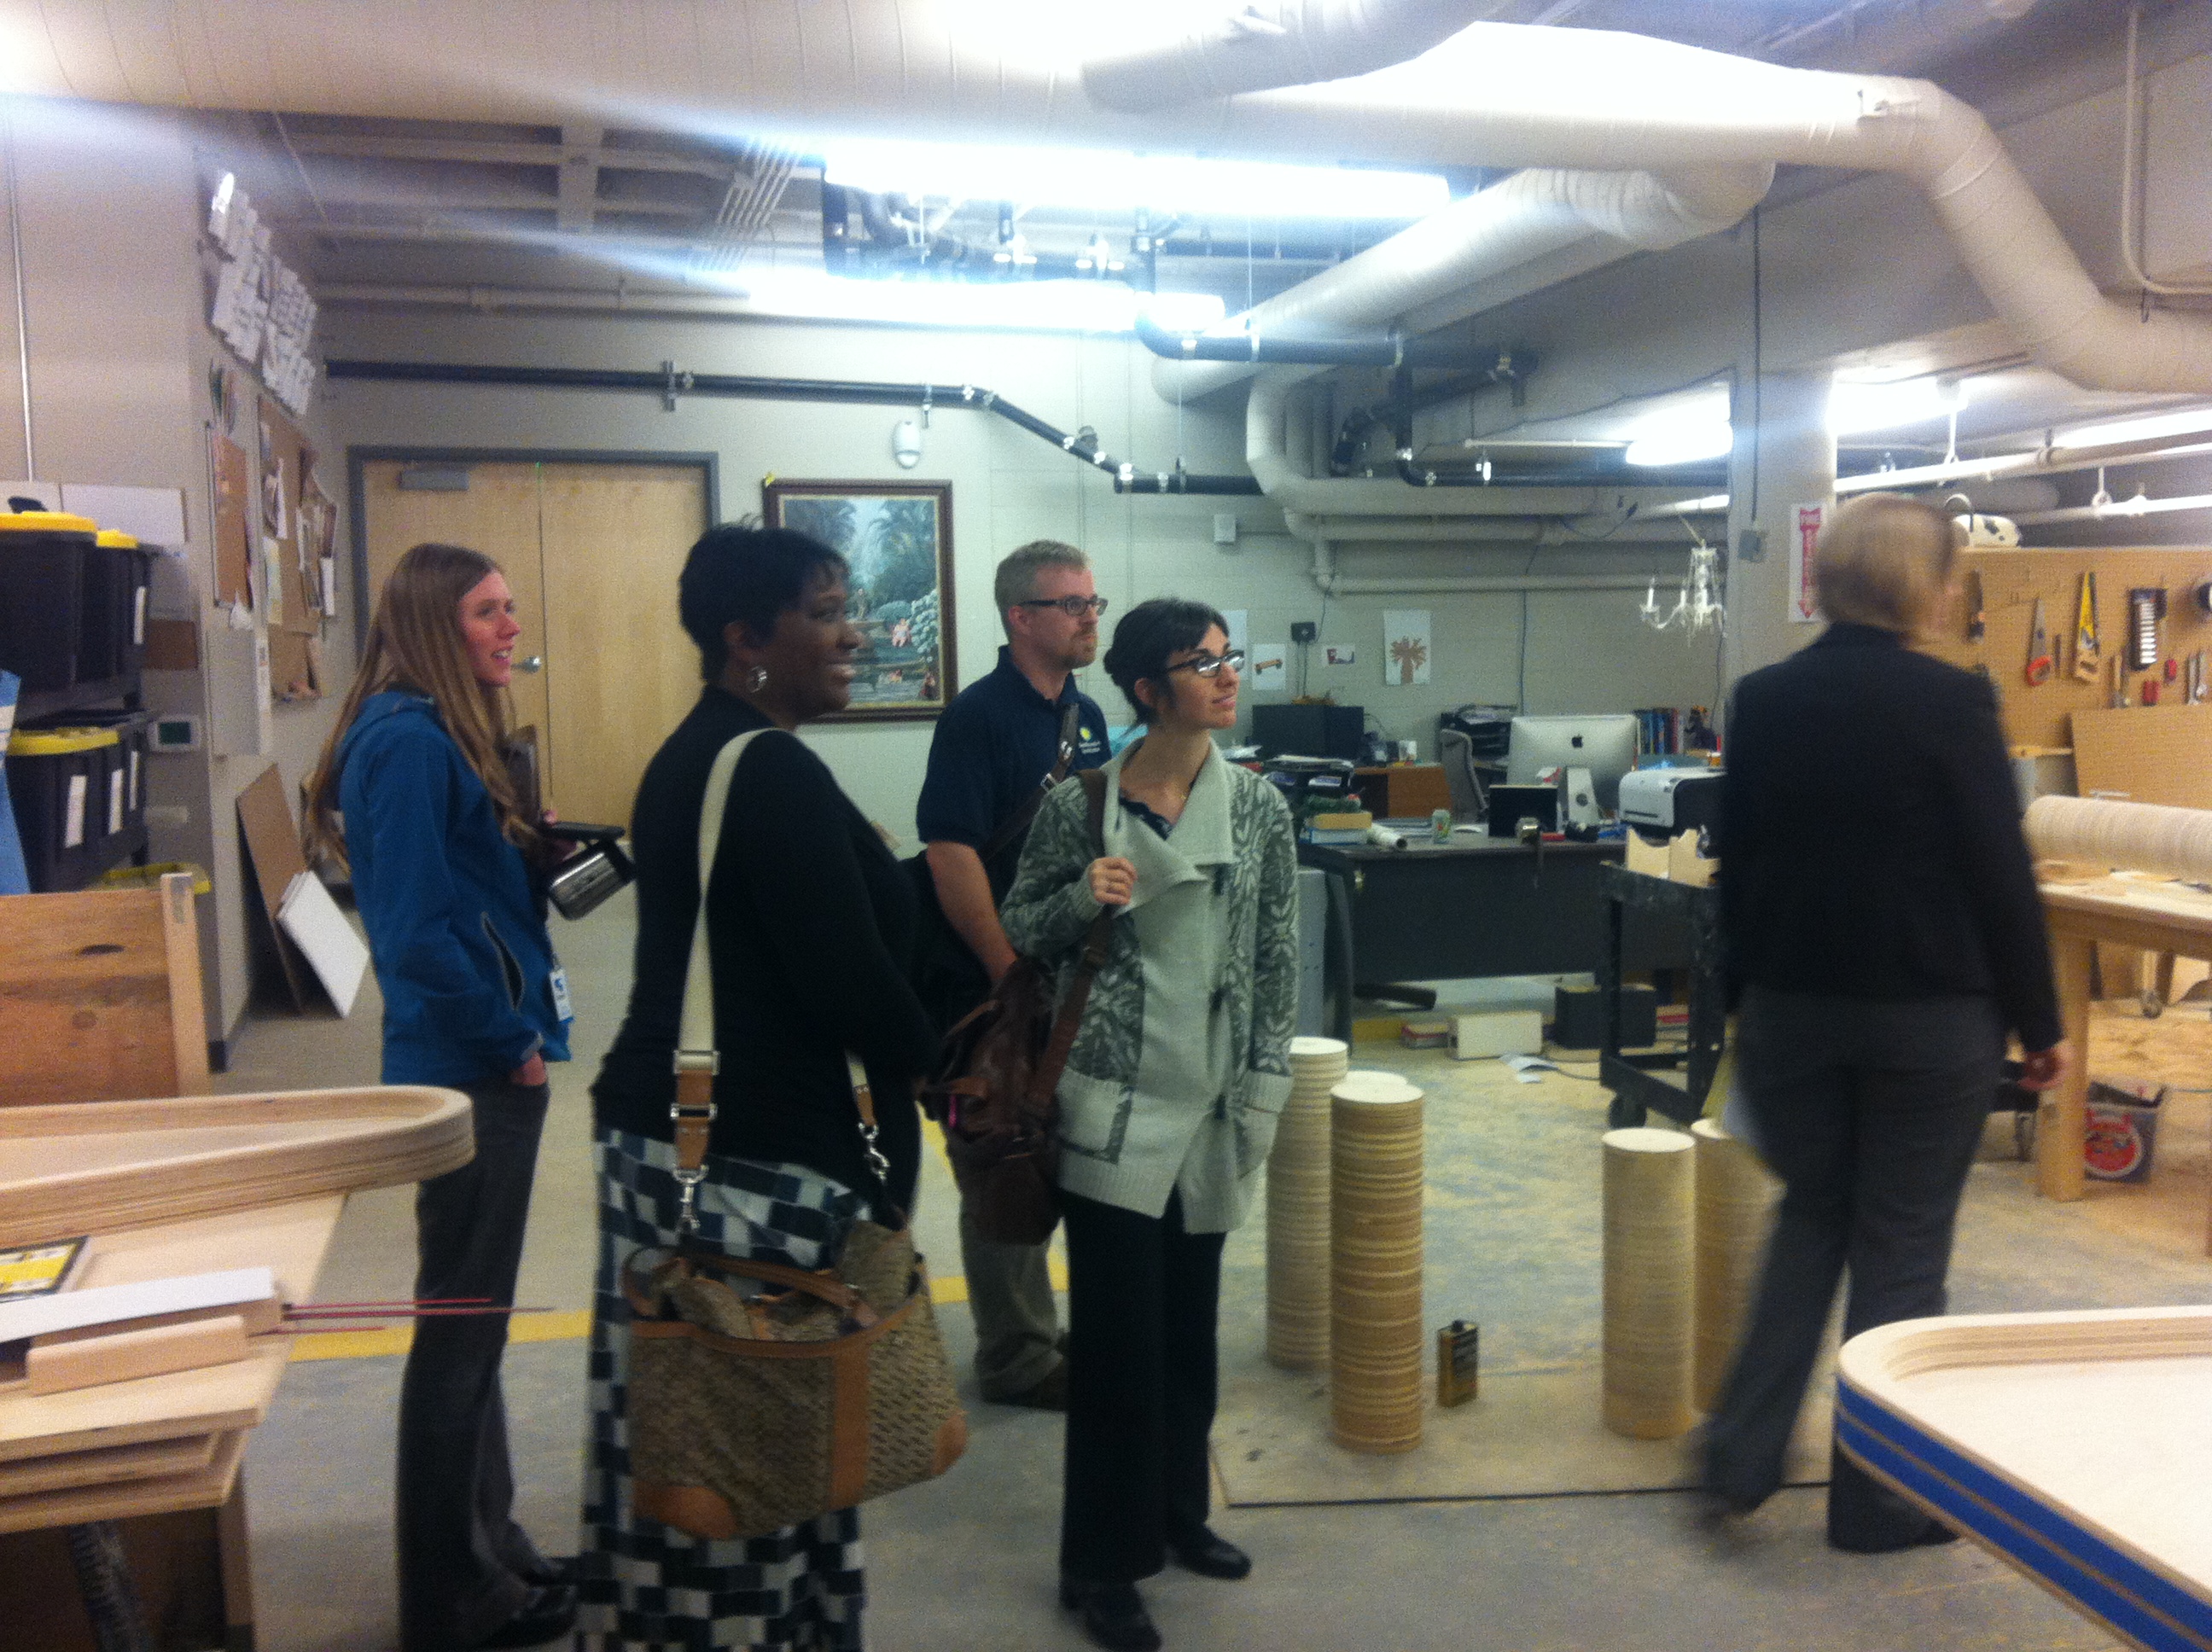 The Spark!Lab team touring the workshop at The Discovery 